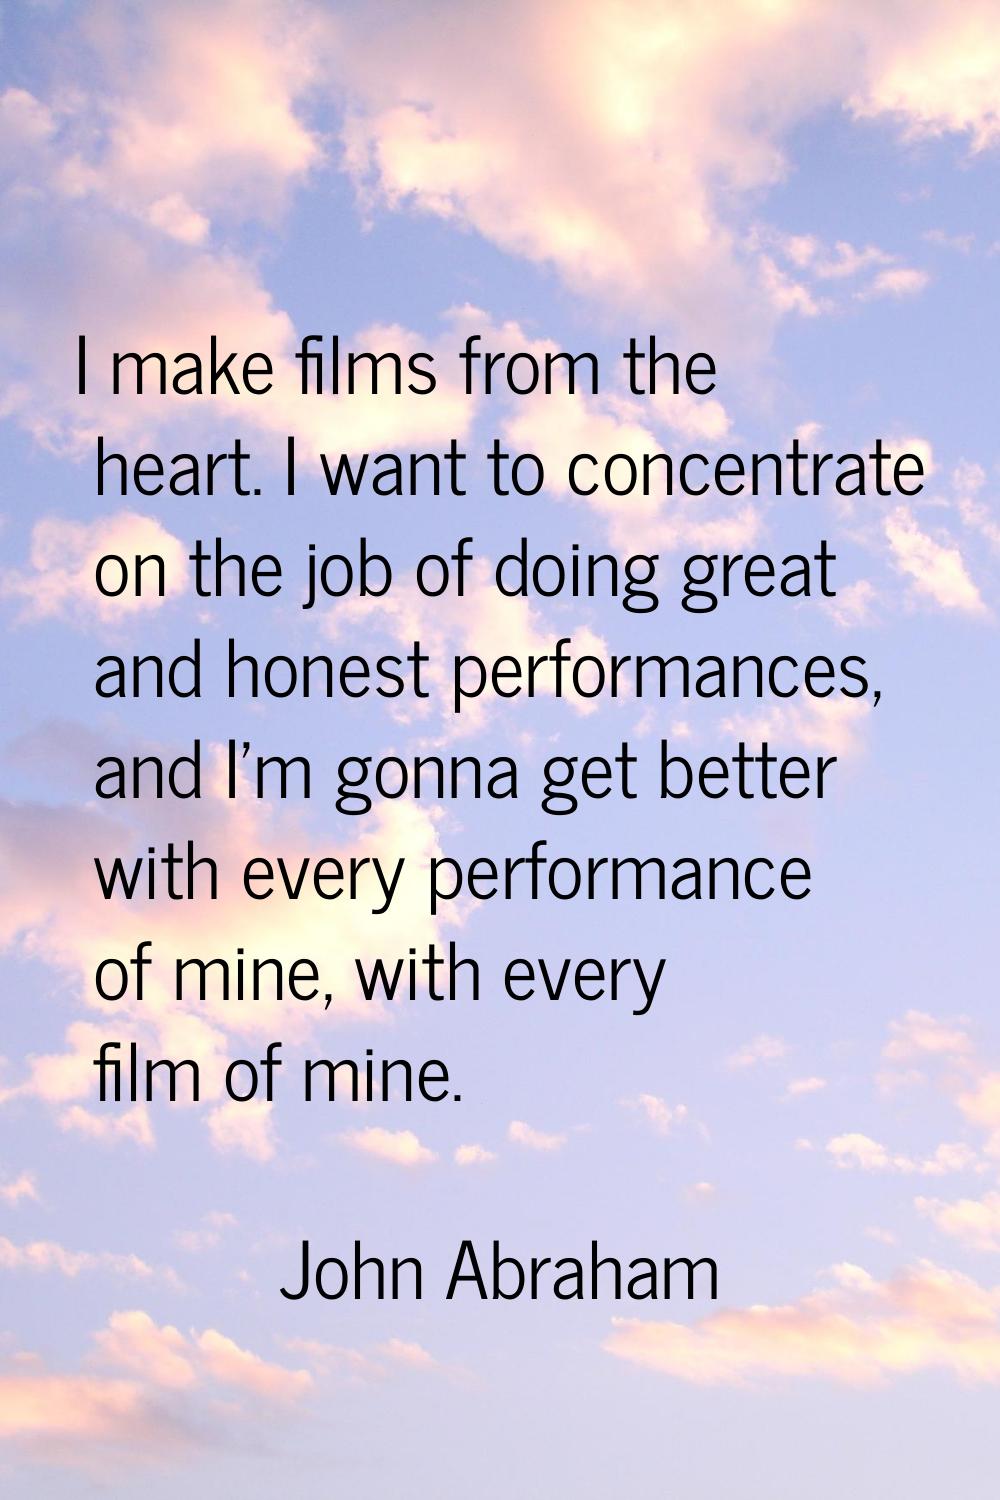 I make films from the heart. I want to concentrate on the job of doing great and honest performance